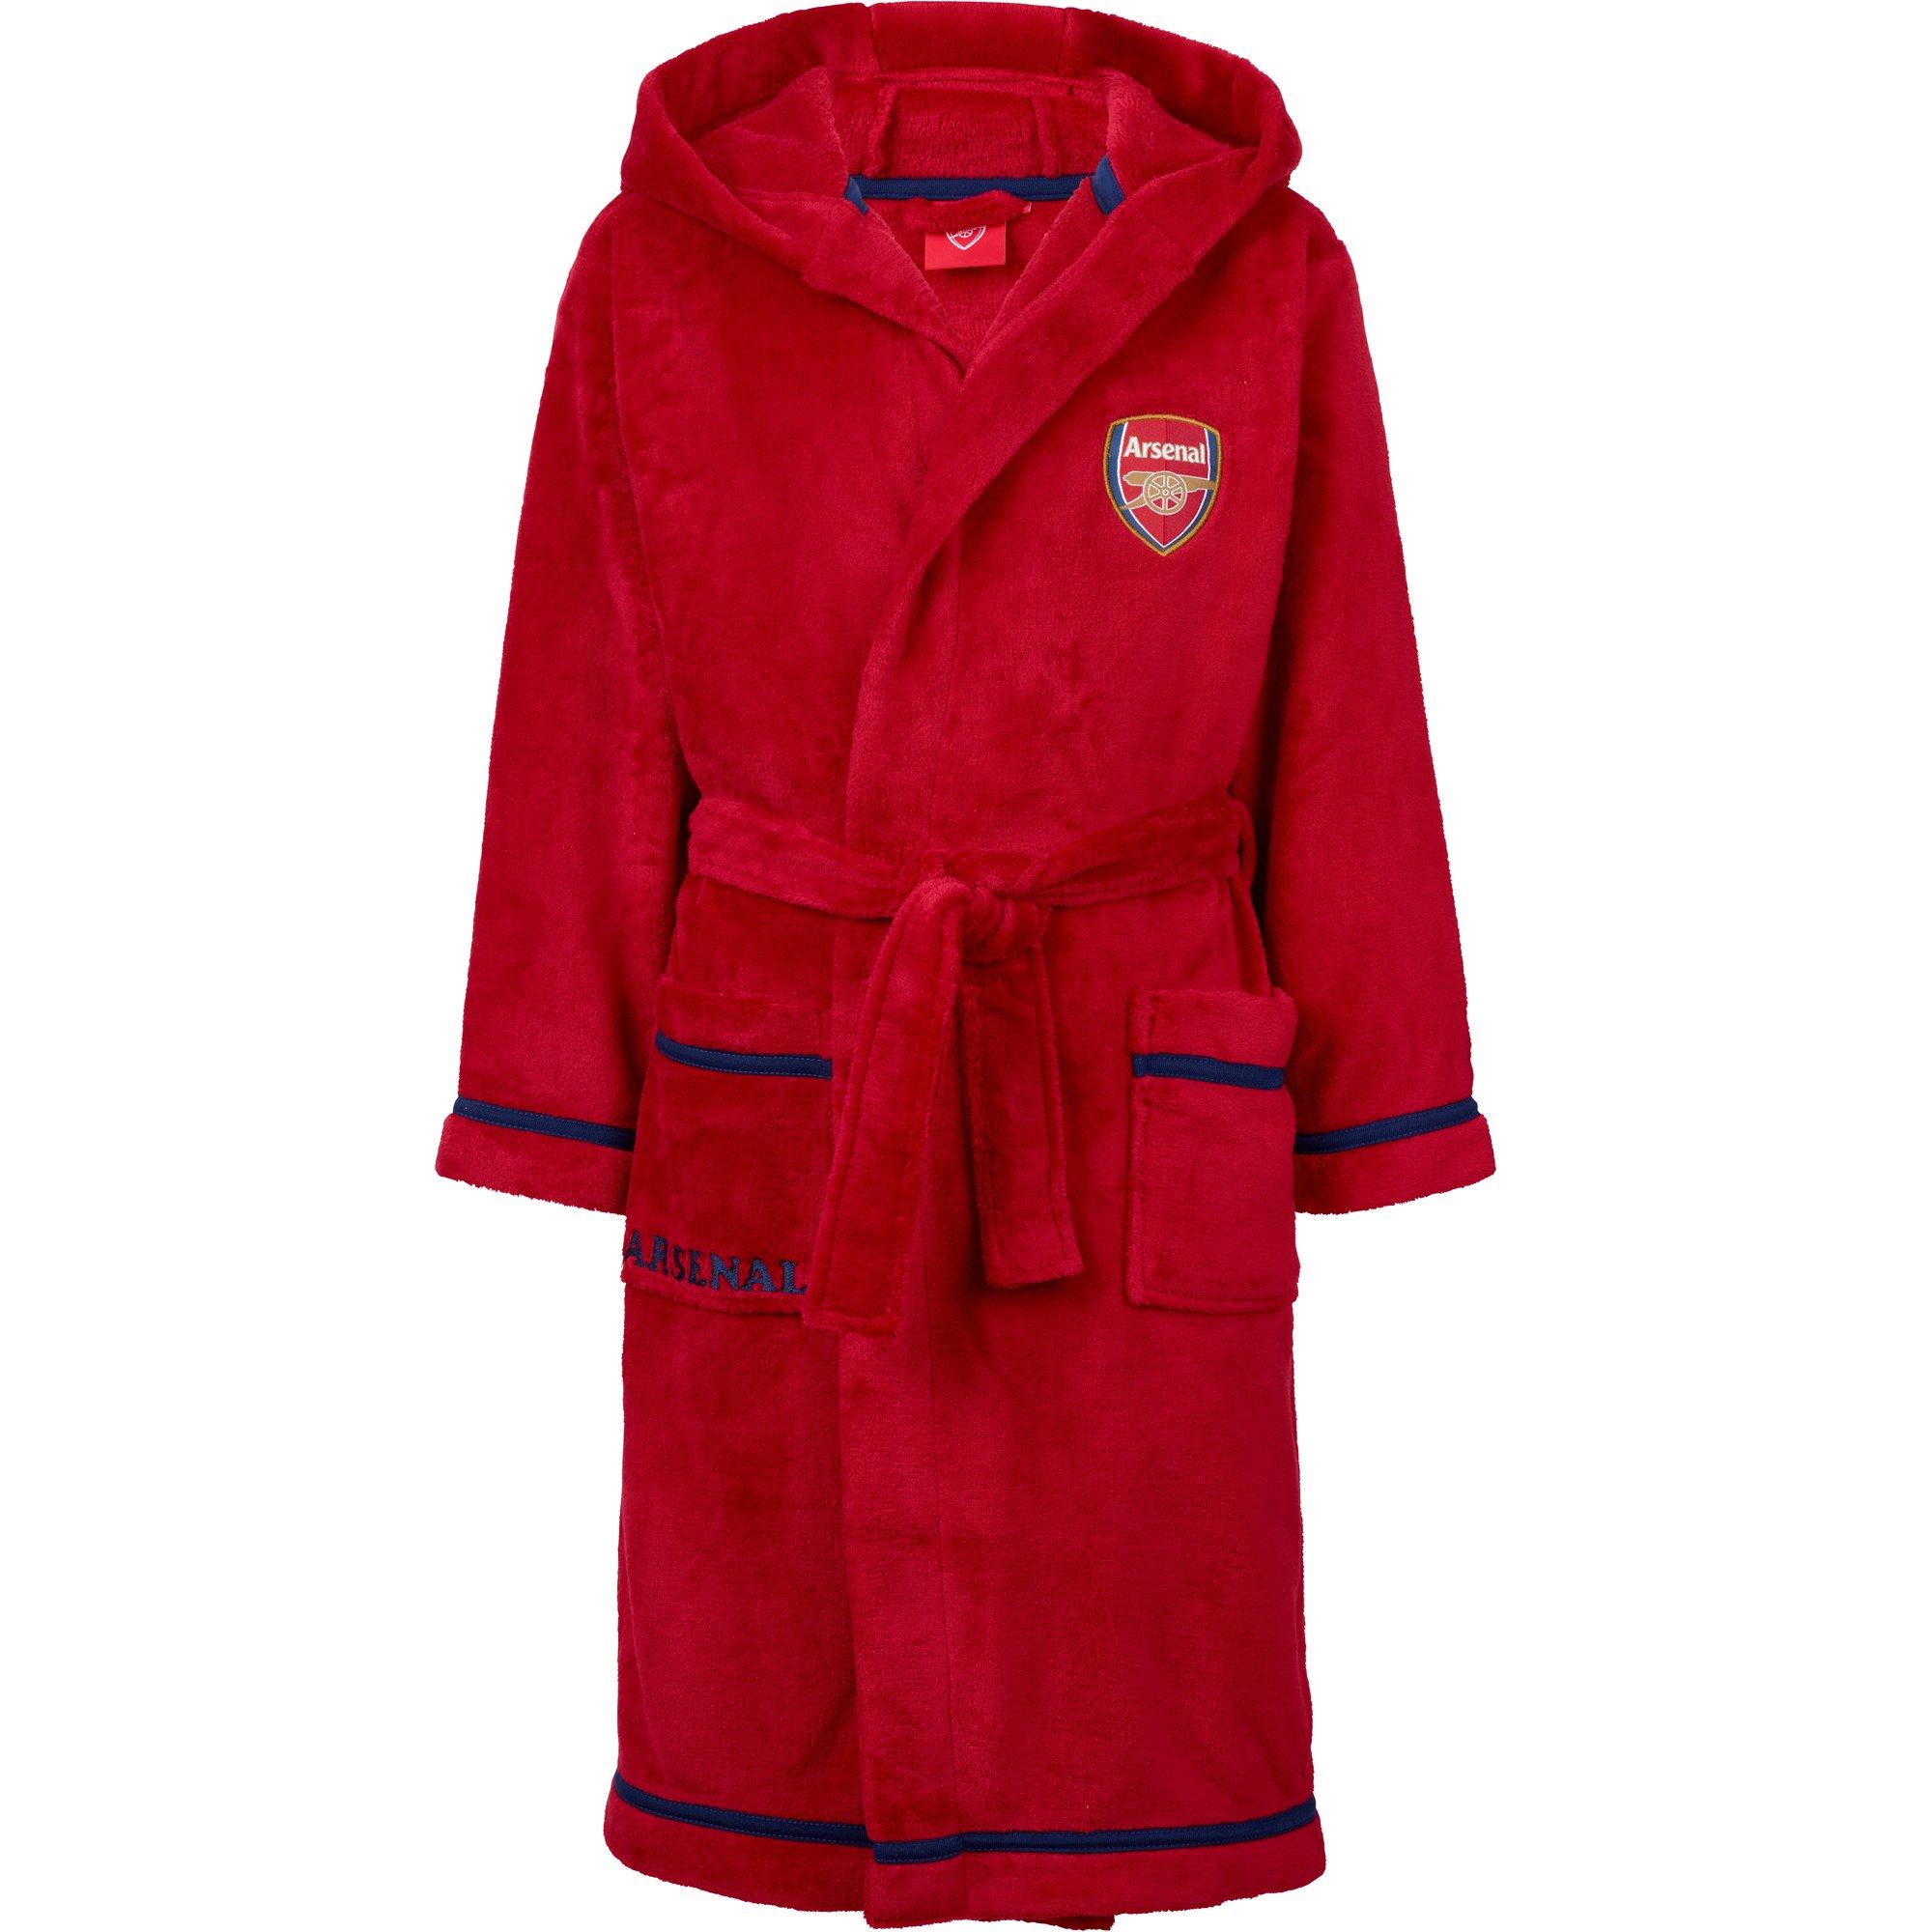 Arsenal Kids Fleece Red Dressing Gown, Multicolor